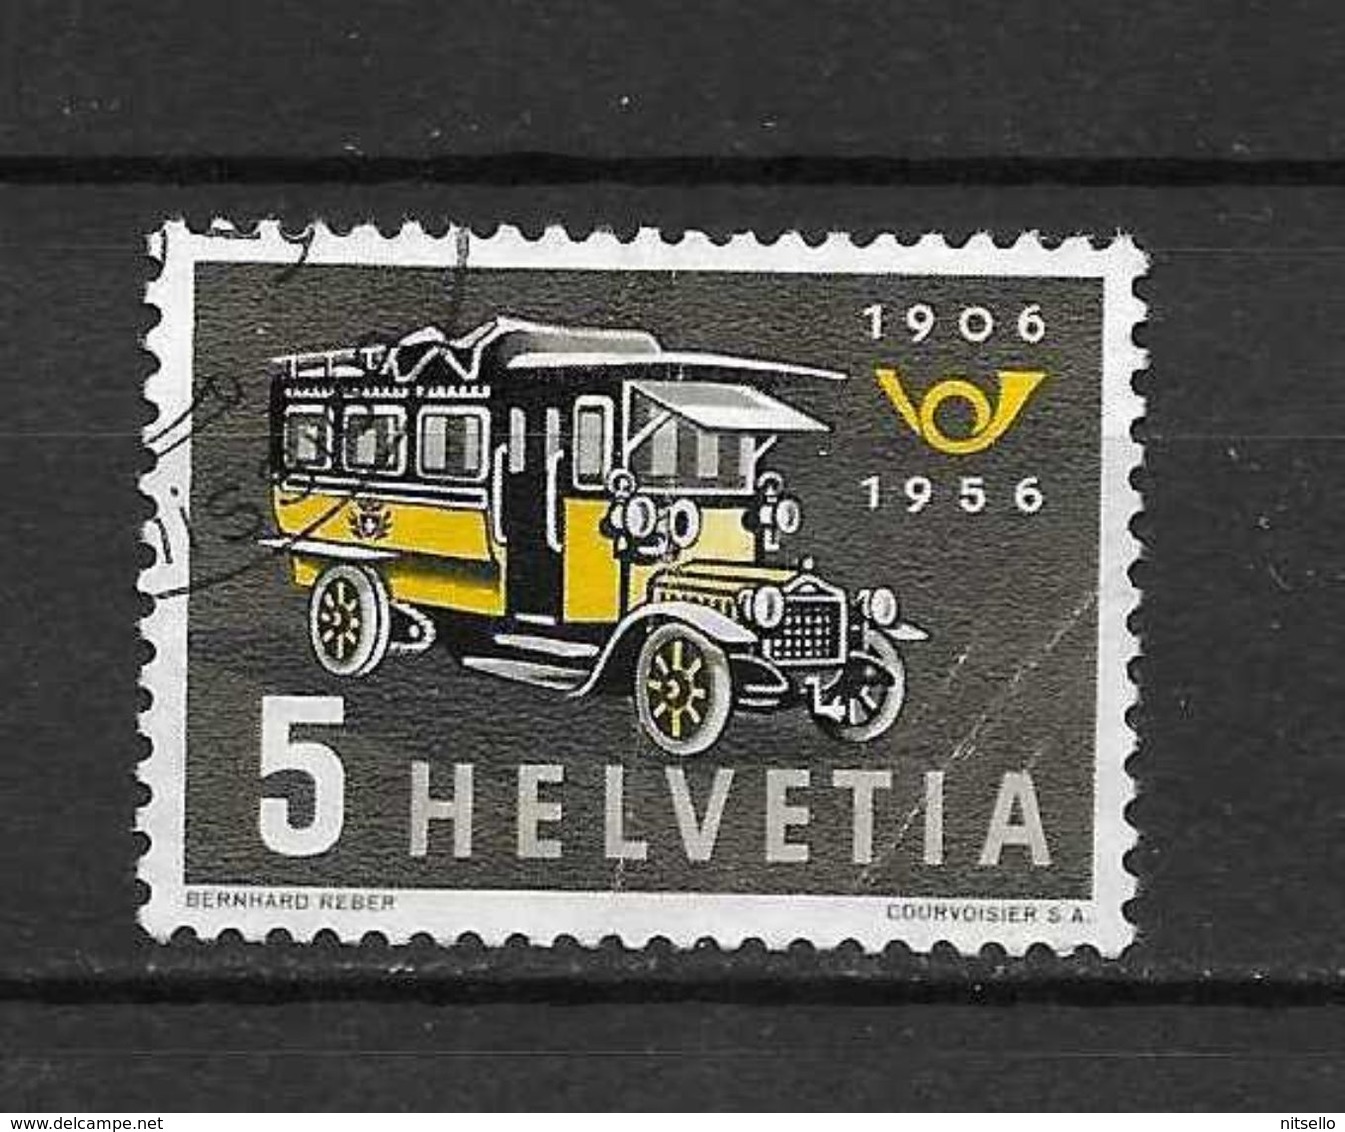 LOTE 1375  ///  (C003)  SUIZA  1956   YVERT Nº: 572   ¡¡¡¡¡ LIQUIDATION !!!!!!! - Used Stamps